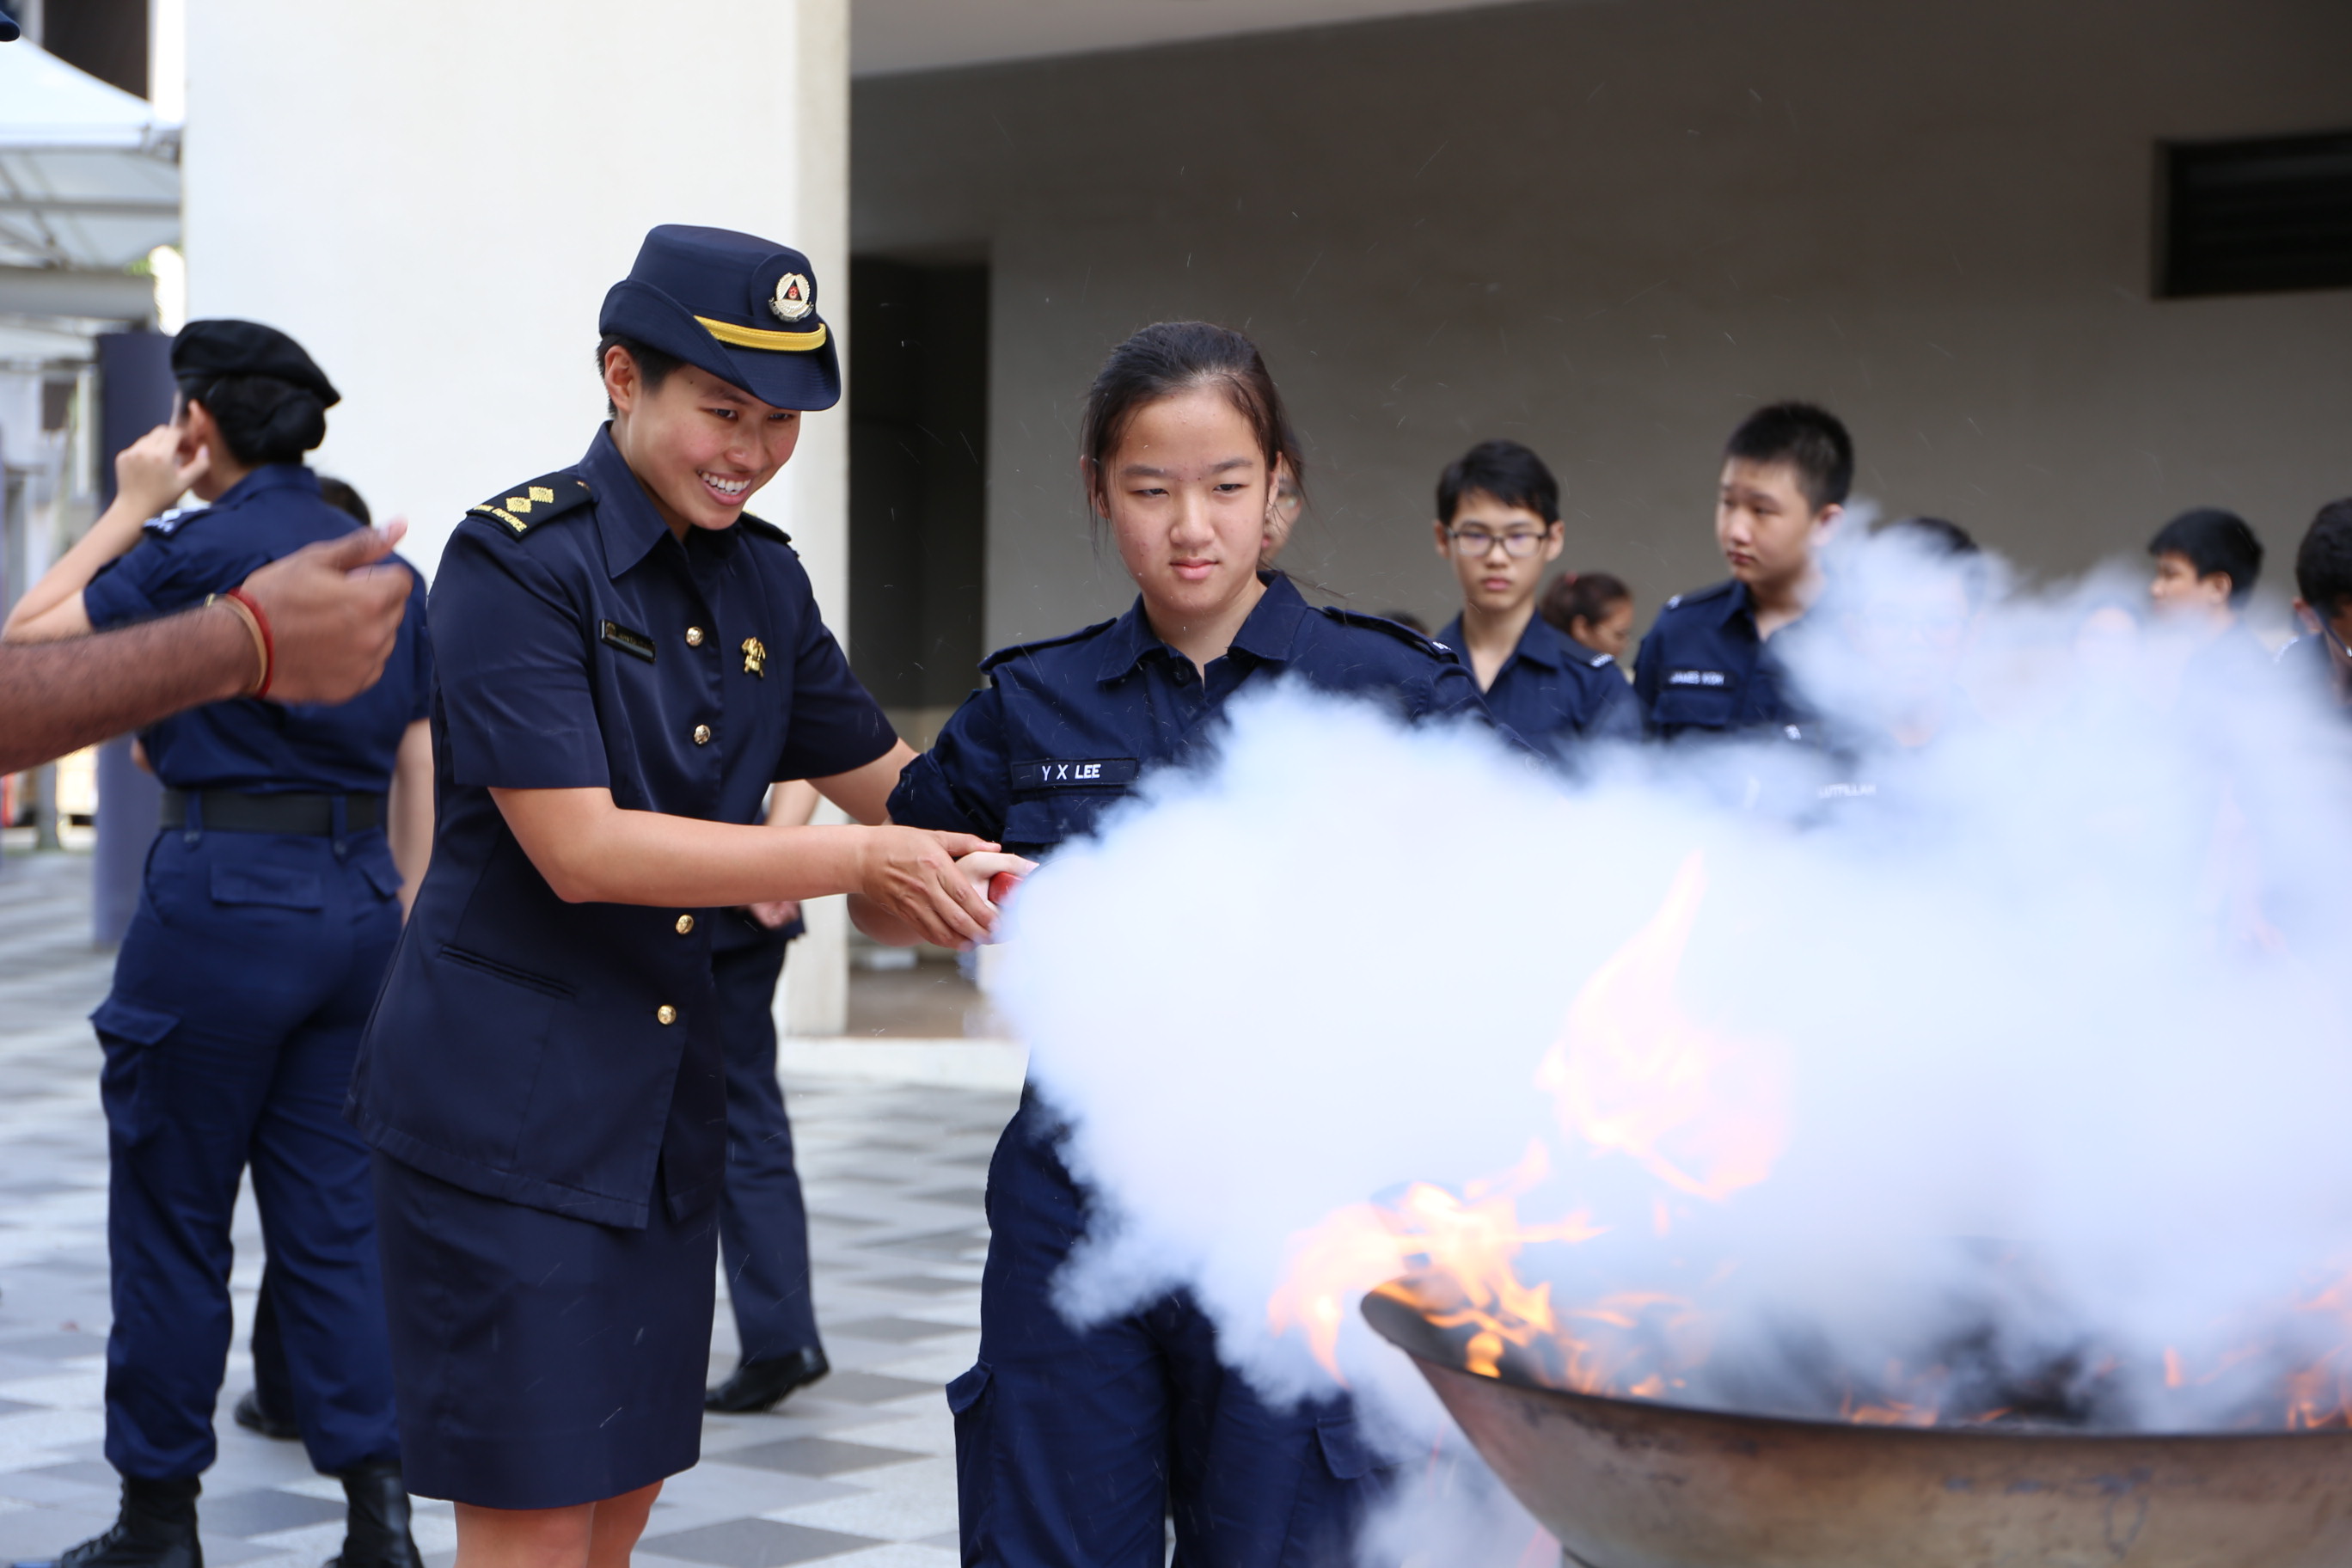 Jadyn teaching cadets how to use a fire extinguisher